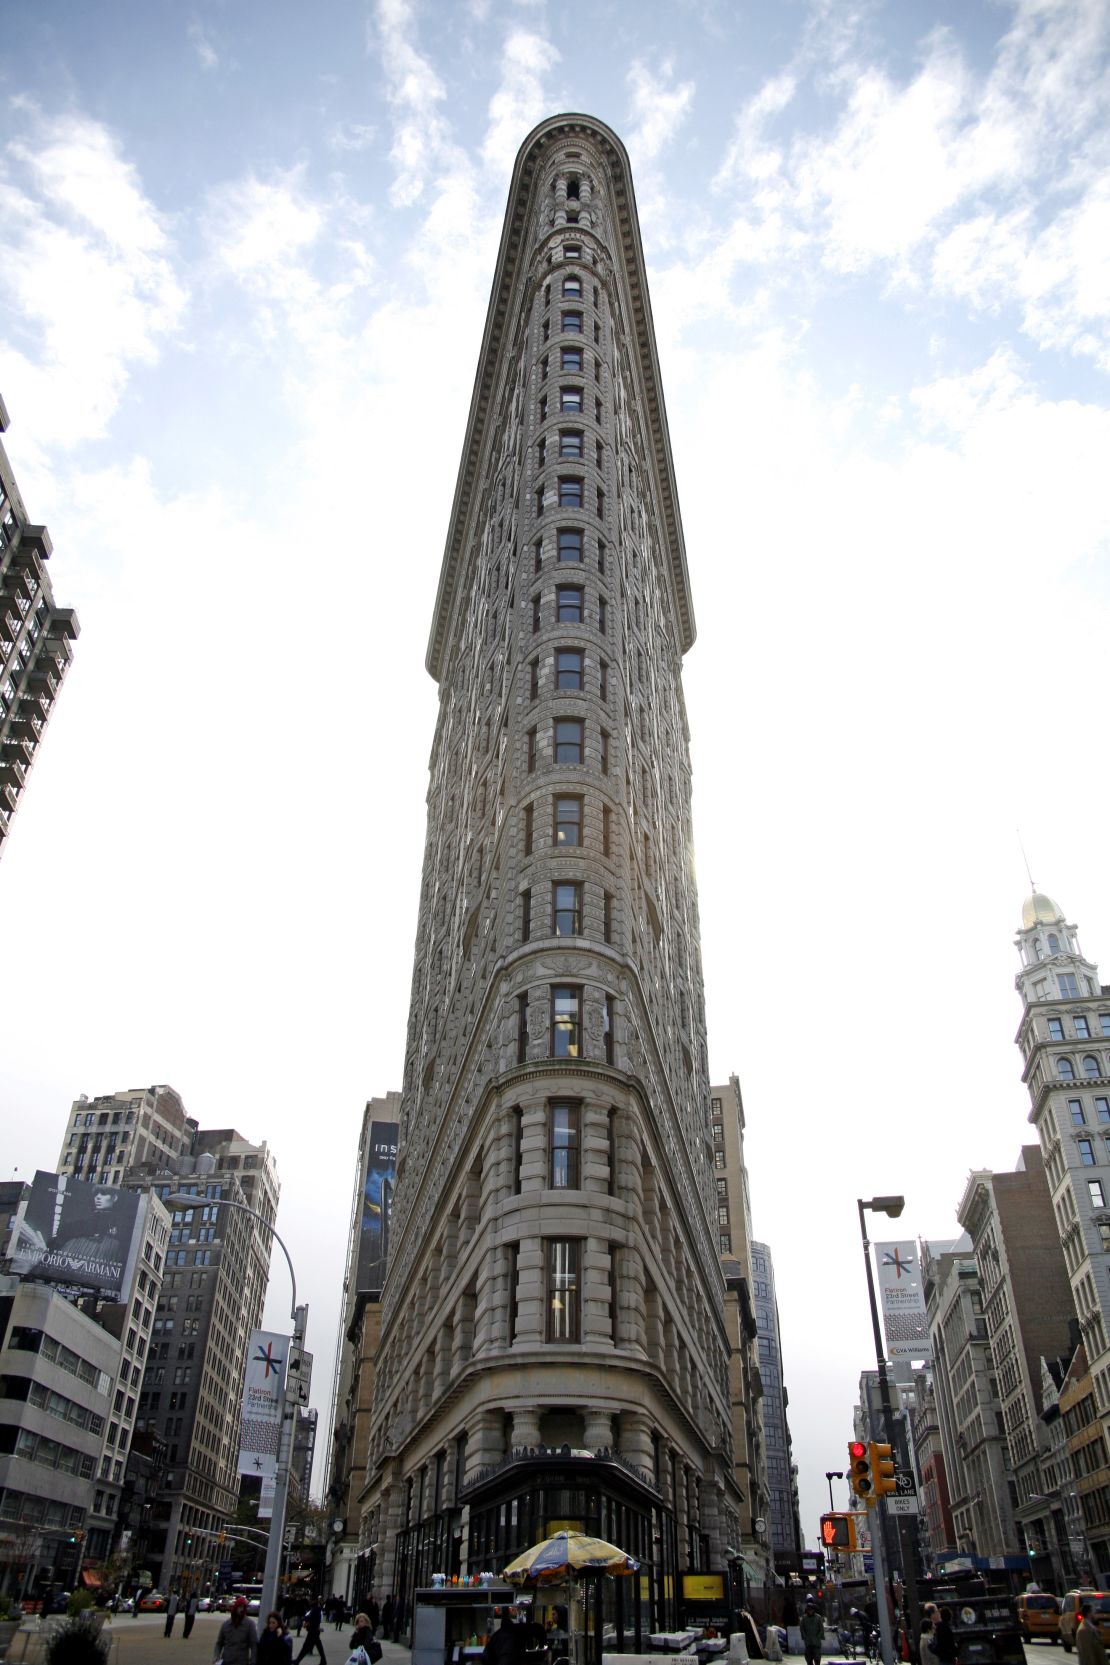 The Flatiron Building has long been eclipsed in height but not in significance.